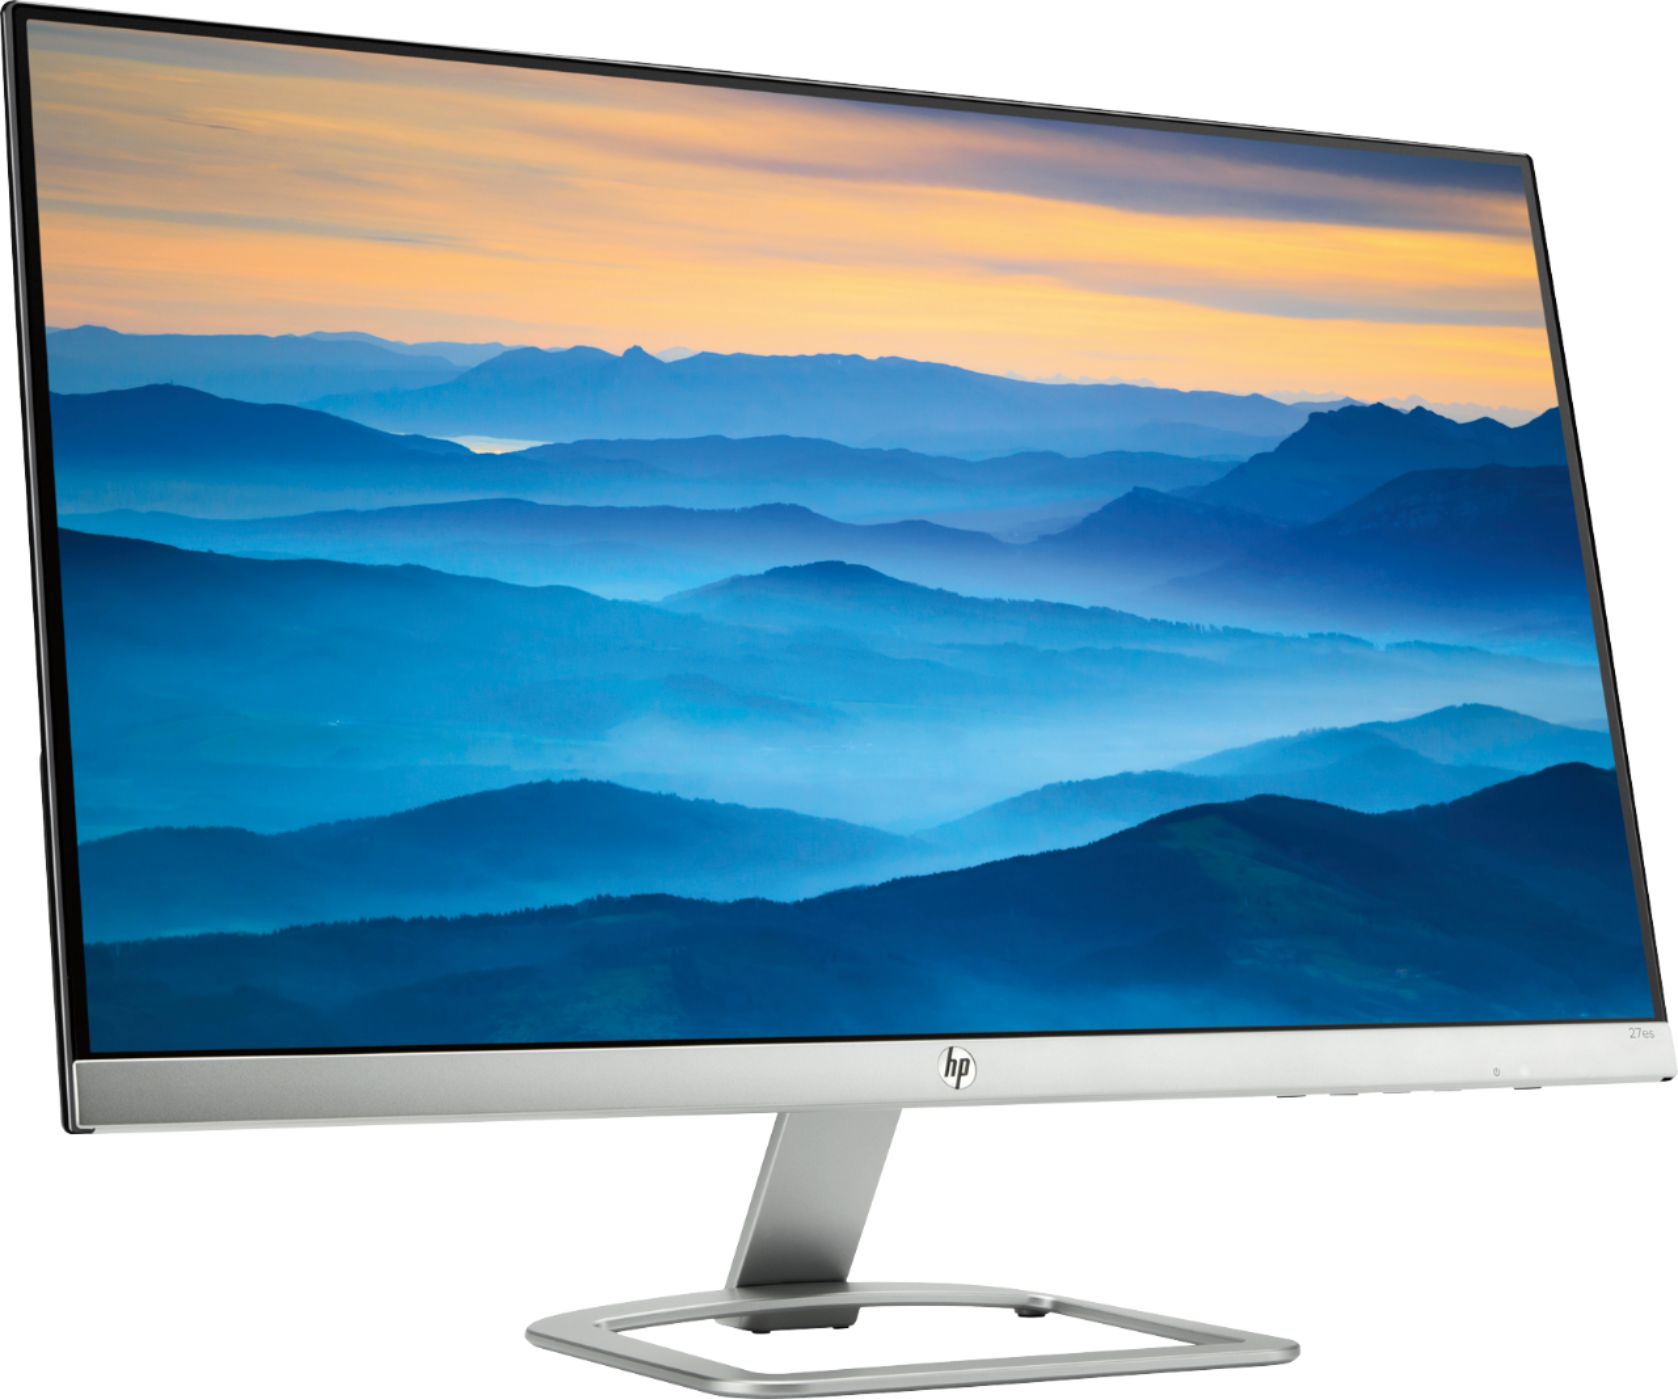 HP 27es 27" IPS LED FHD Monitor Natural Silver T3M86AA#ABA - Best Buy